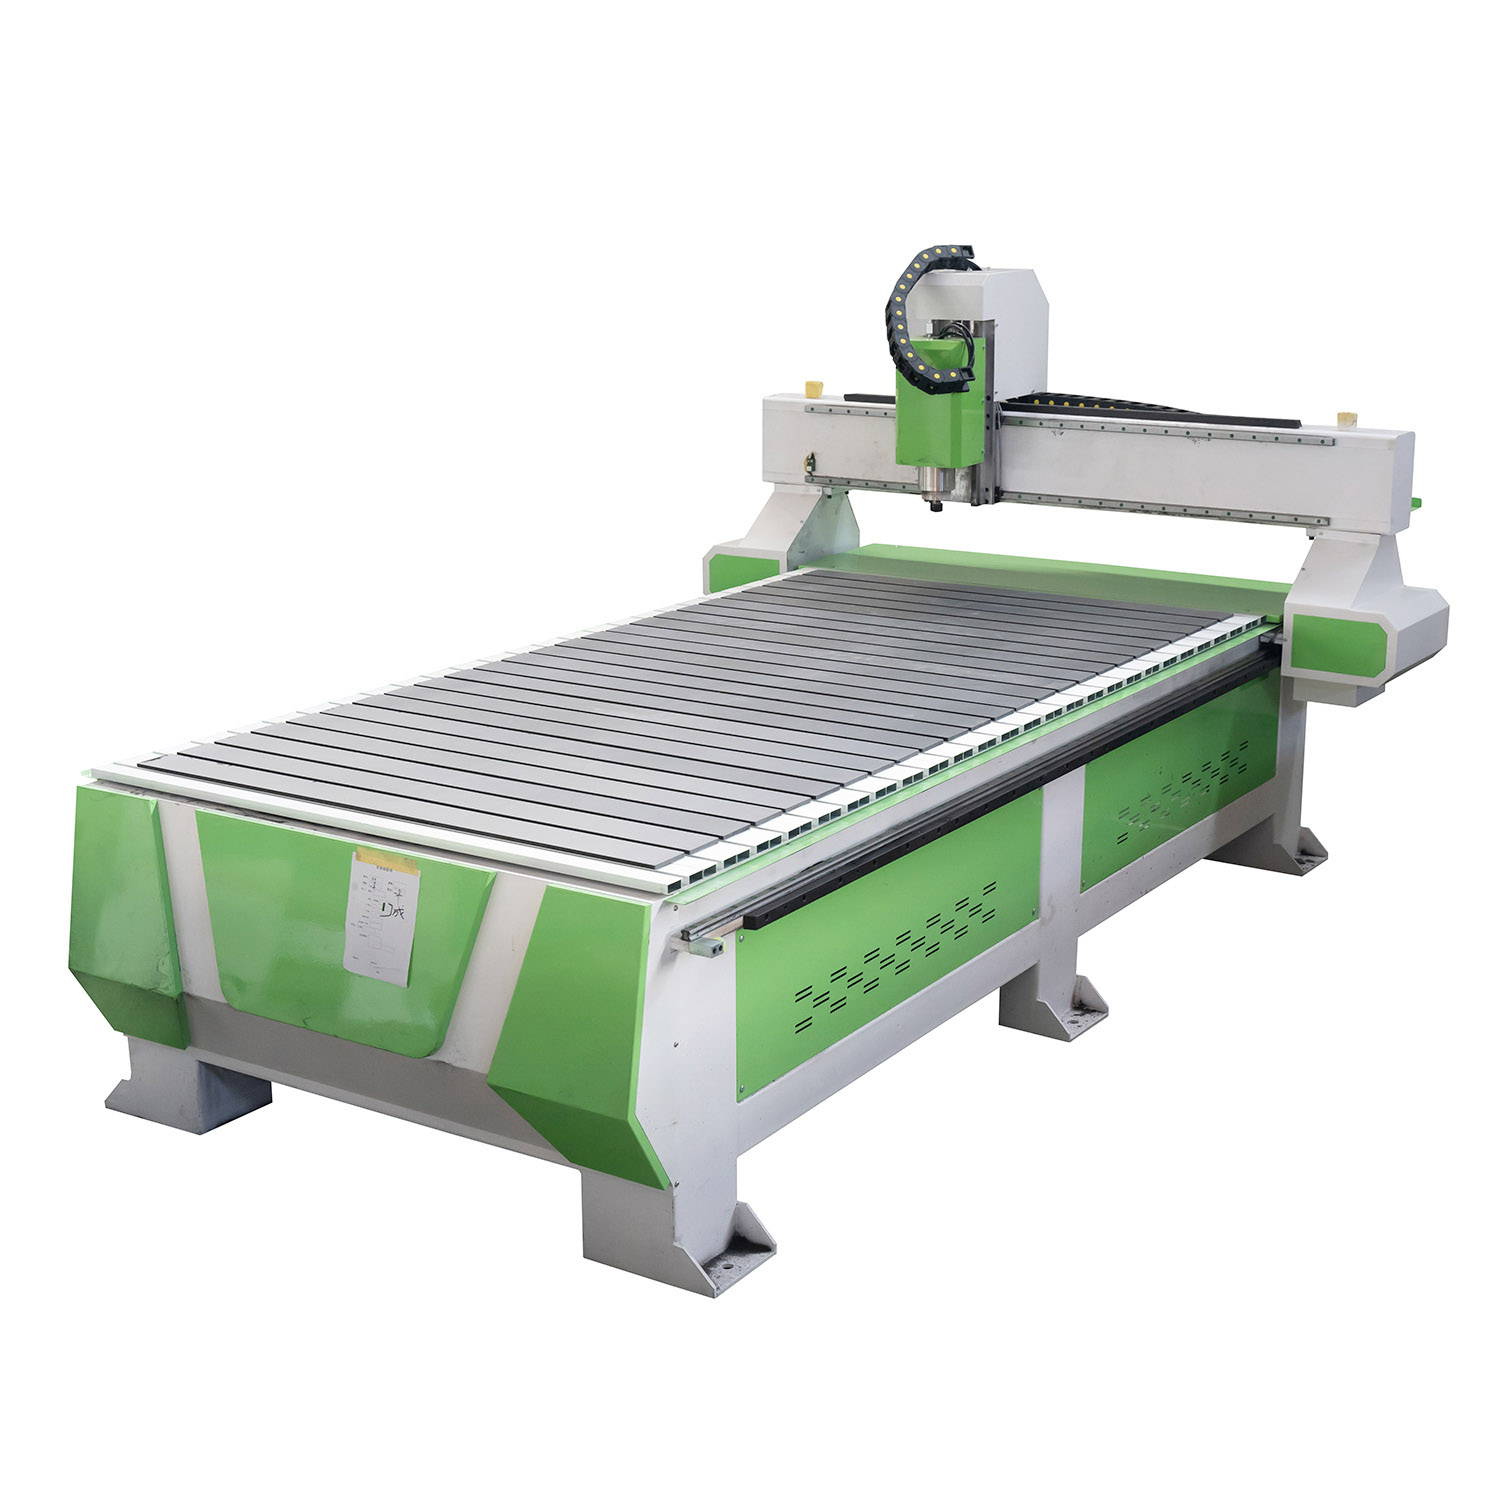 China New Product Cnc Router Dust Collection - 3 Axis CNC Router Wood Carving Machine for MDF Kitchen Cabinet Furniture – Apex